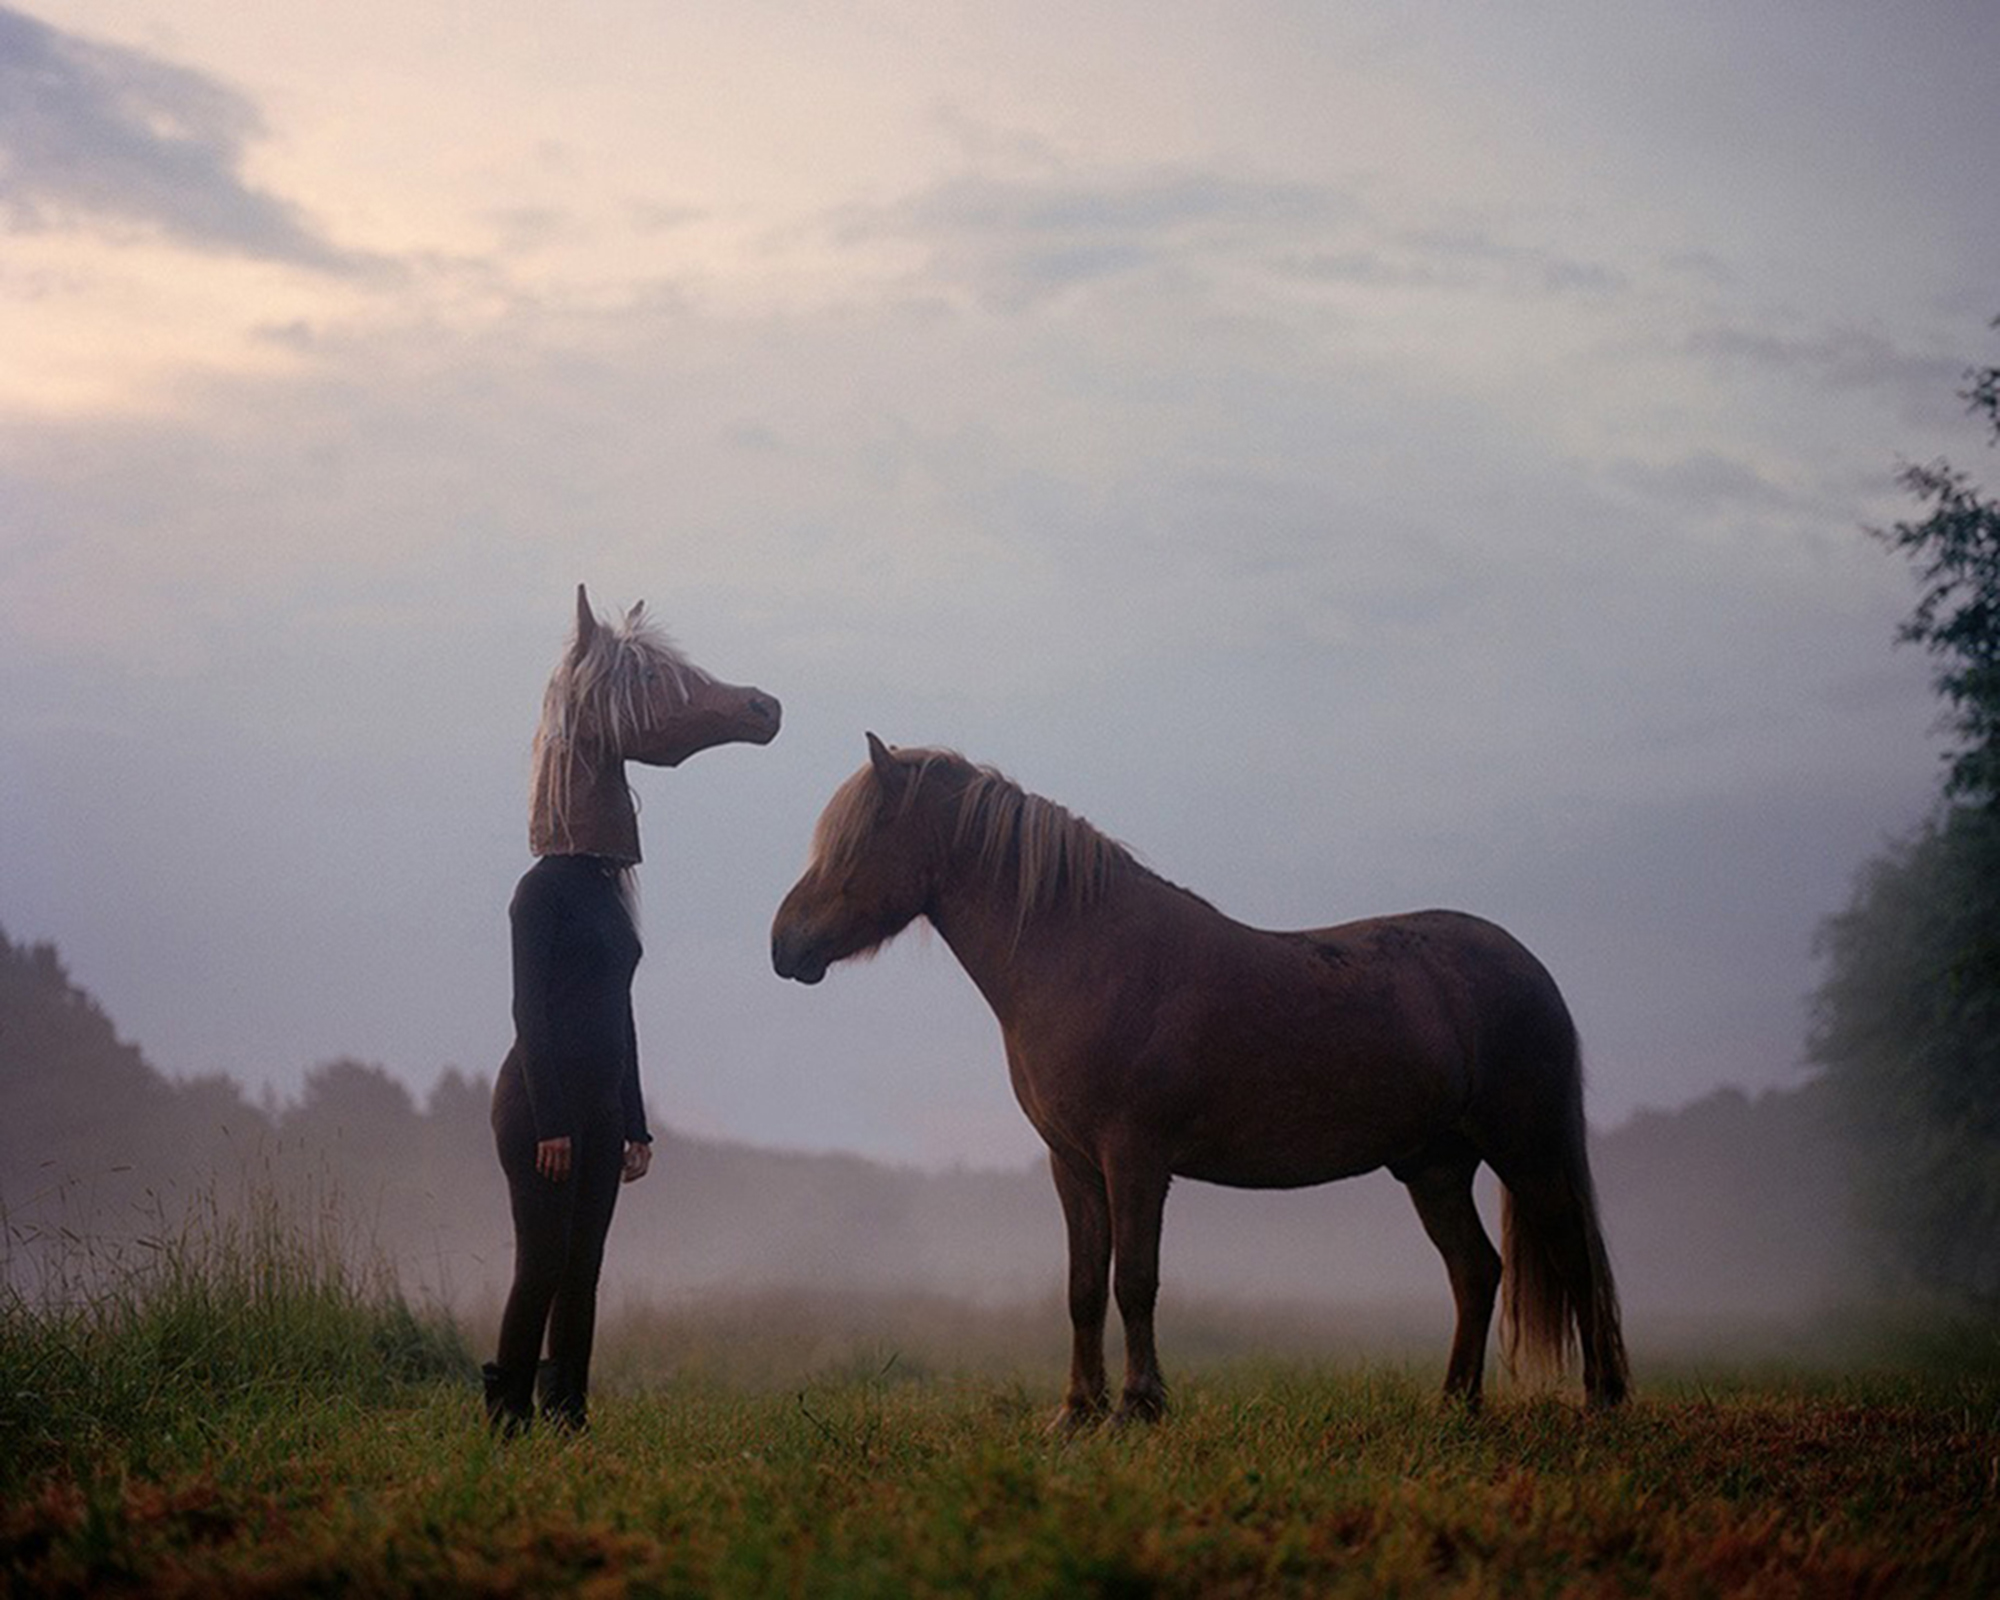 Mist (The Woman Who Married a Horse) © Wilma Hurskainen 2011